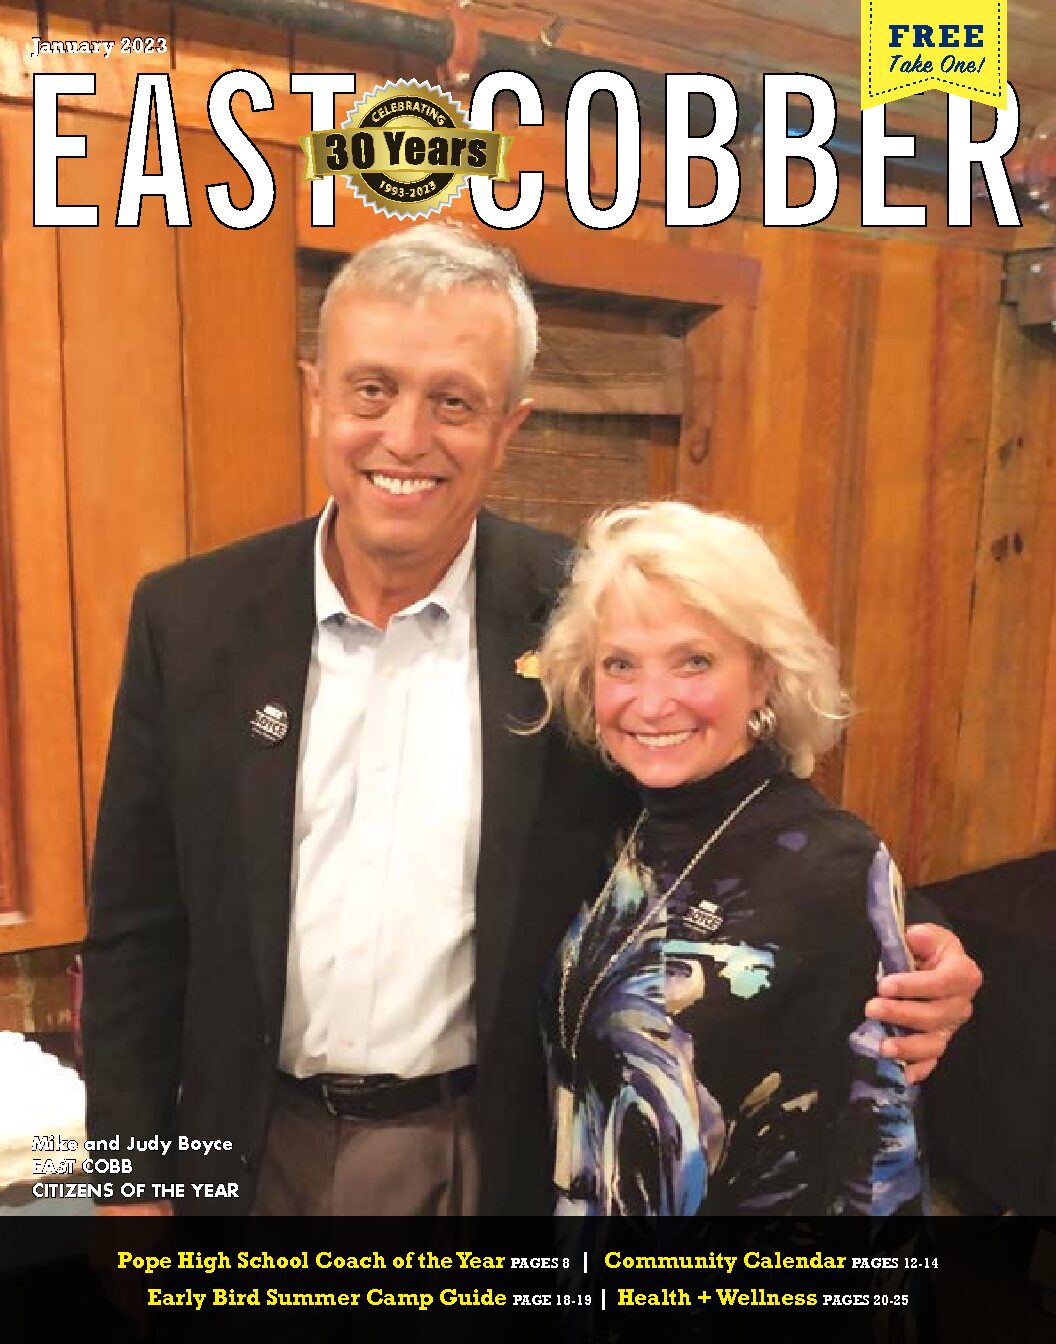 LOOKS WHO’S ON THE FRONT COVER: Mike and Judy Boyce, East Cobb’s Citizens of the Year